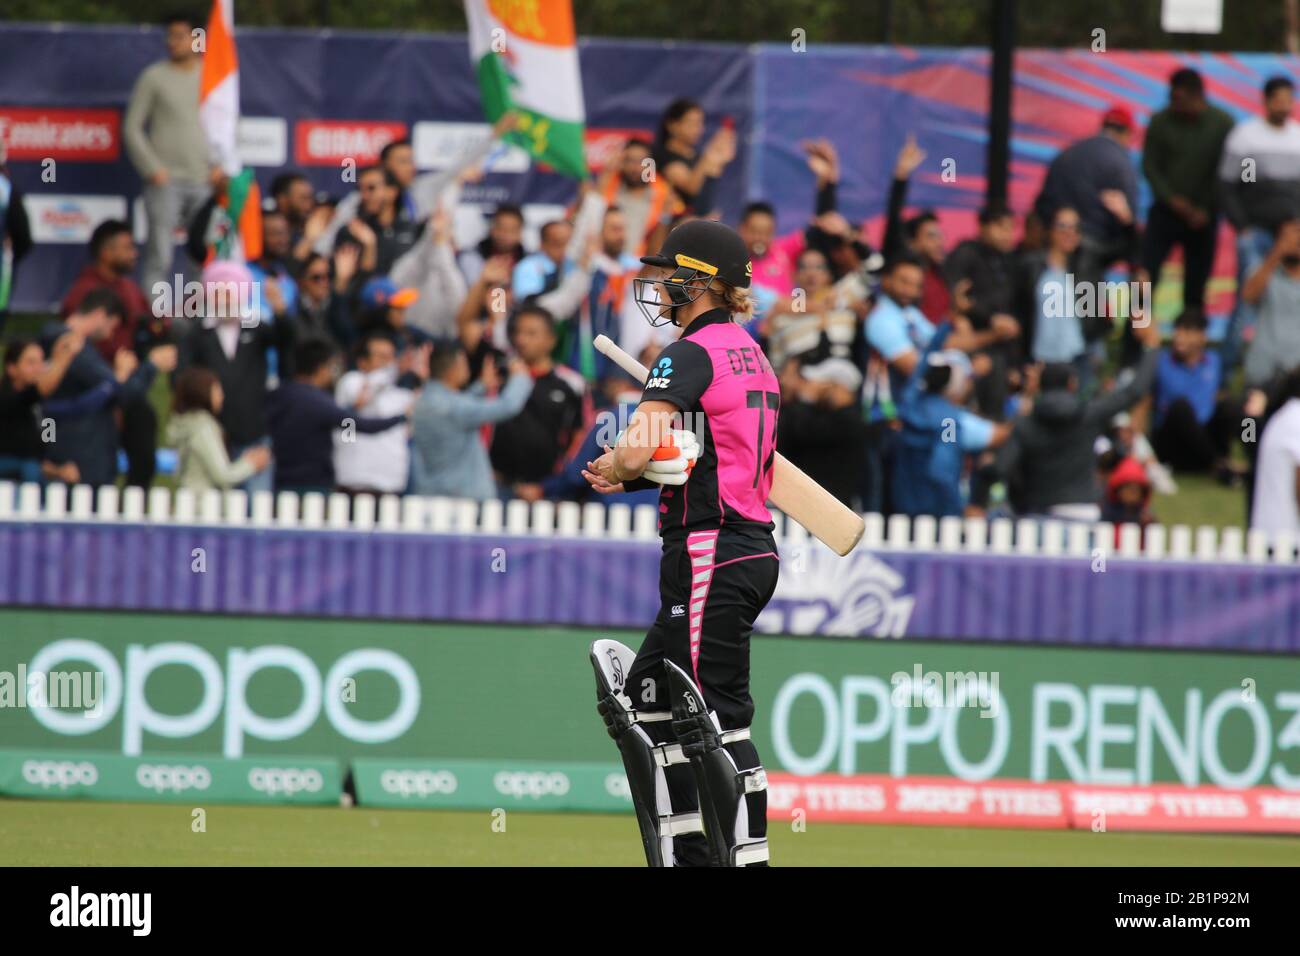 Junction Oval, Melbourne, Australia. 27th Feb, 2020. ICC Womens T20 World Cup Game 09-India Women Playing New Zealand Women.New Zealand Captain Sophie Devine walks off the ground after being dismissed to the delight of the huge and vocal crowd During the Game-Image Credit: brett keating/Alamy Live News Stock Photo